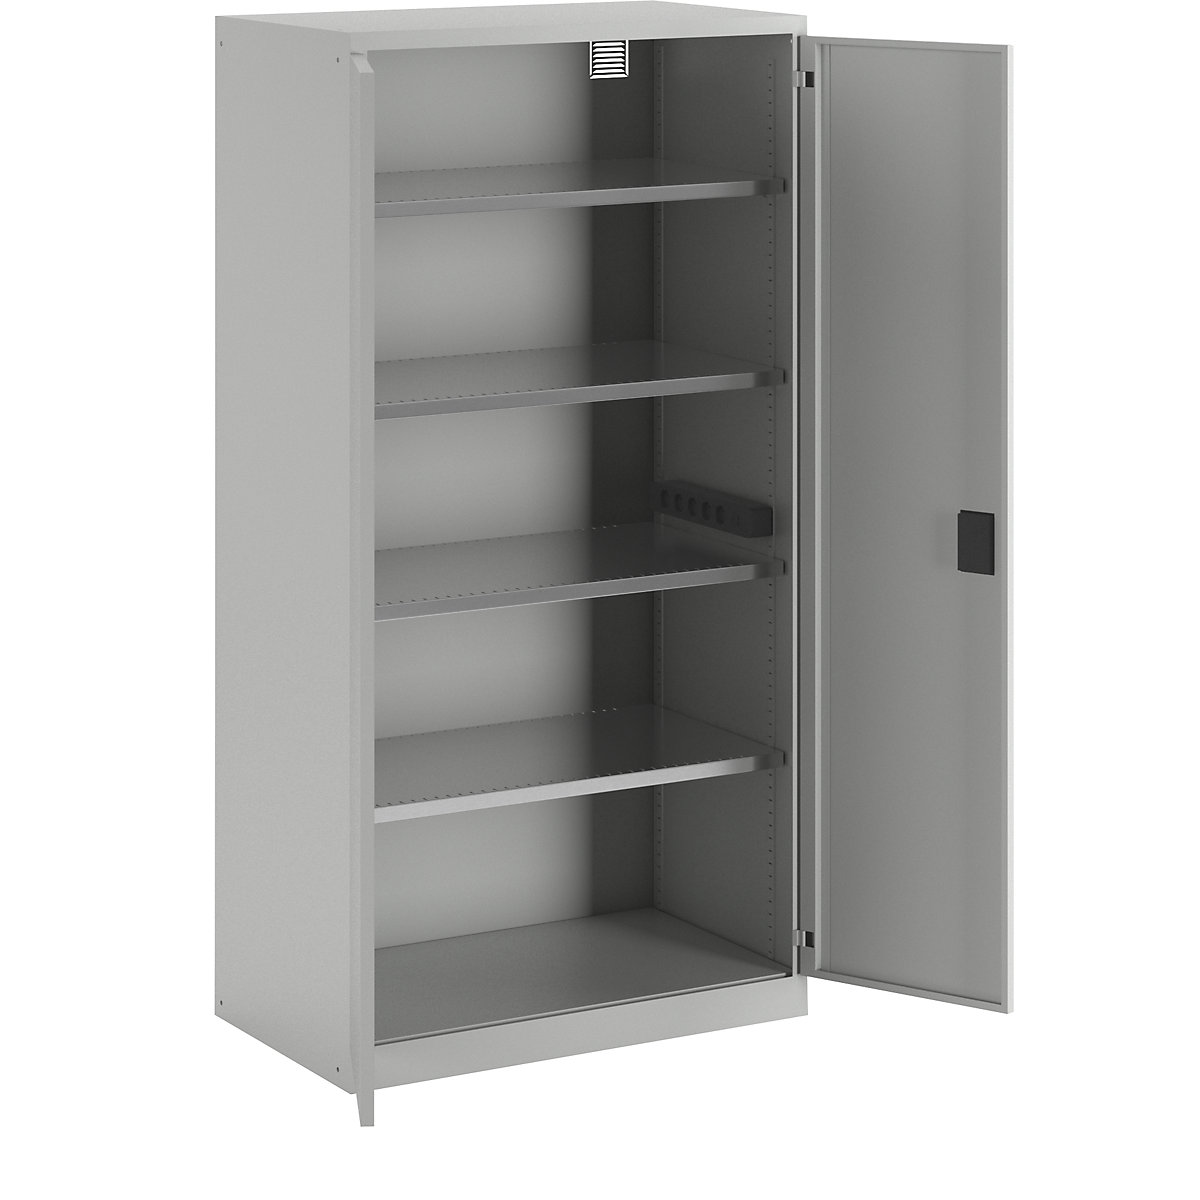 Battery charging cabinet – LISTA, 4 shelves, solid panel doors, power strip at side, grey-15